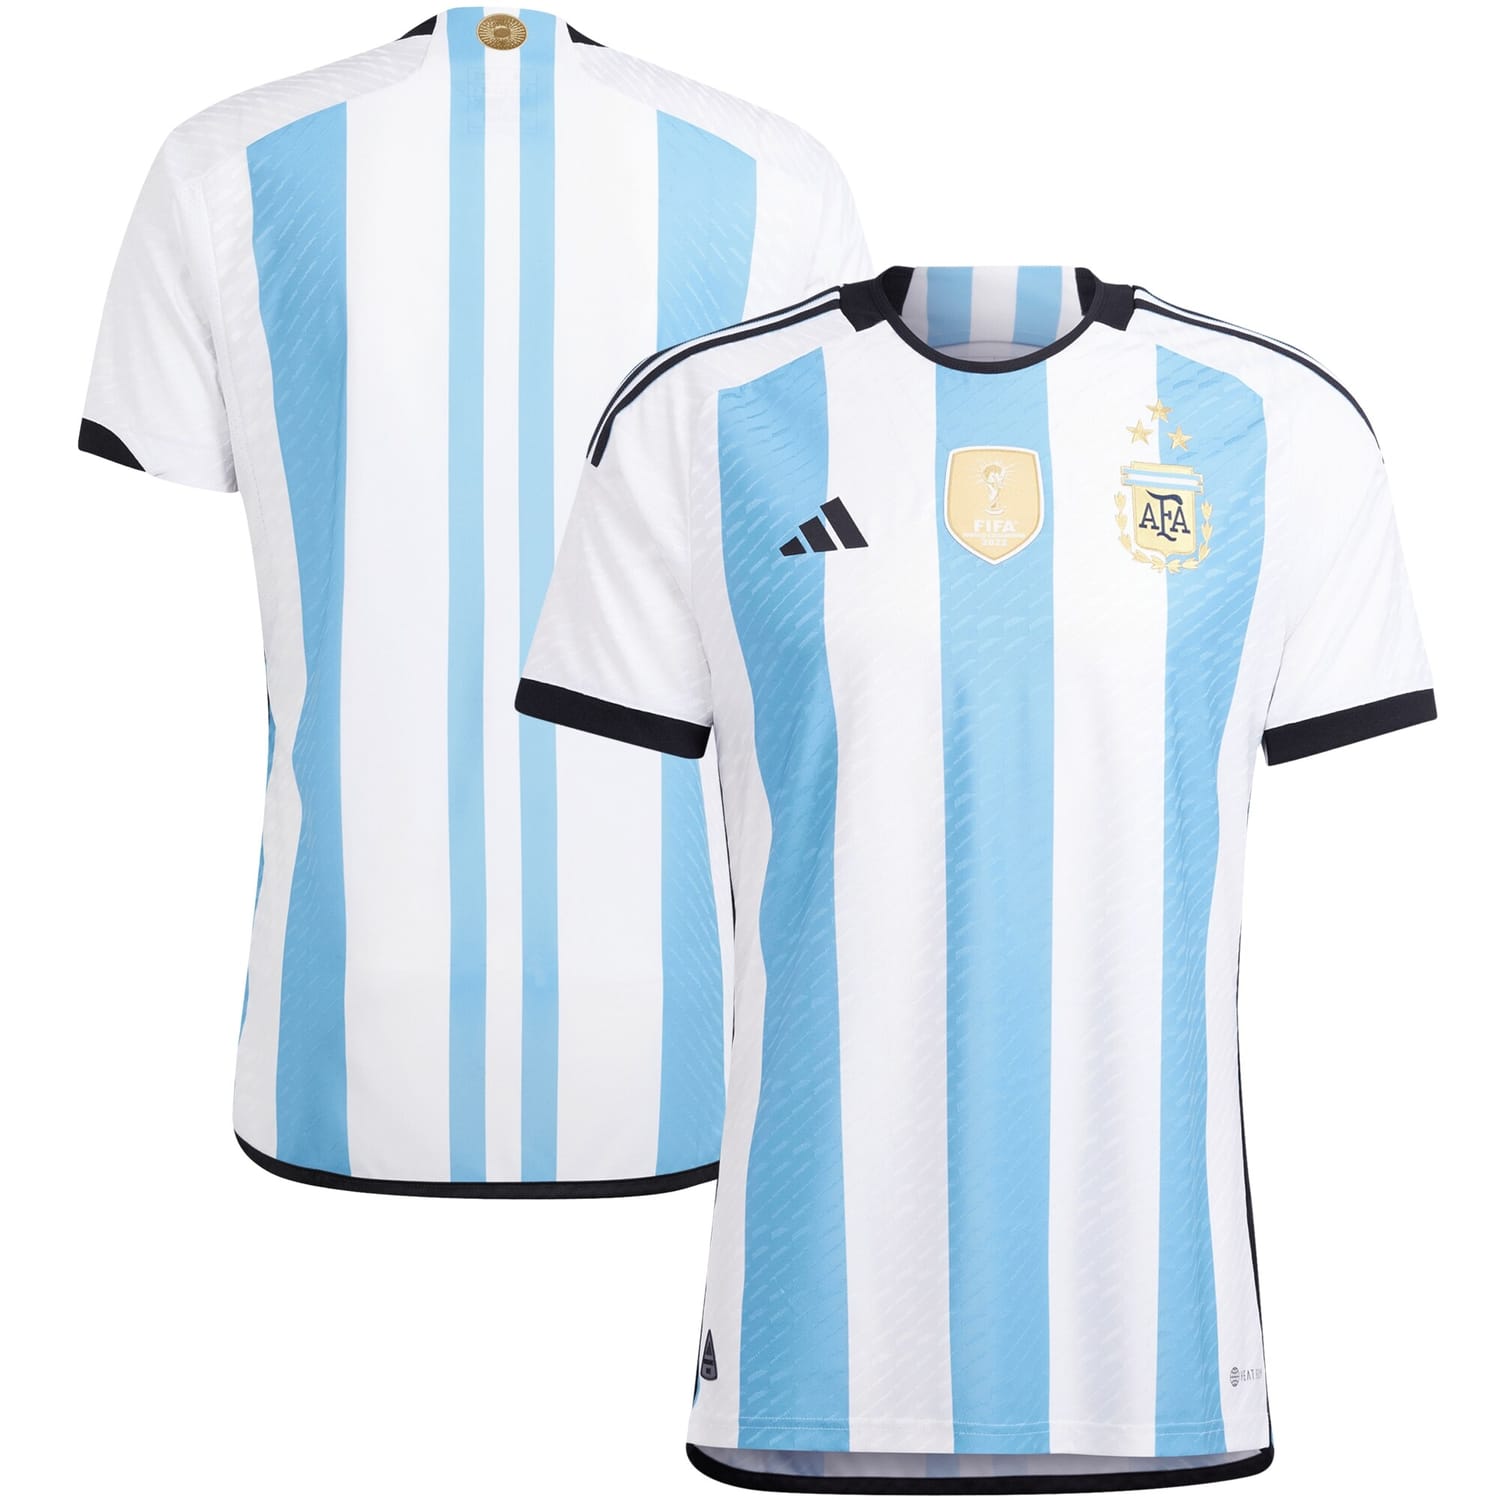 Argentina National Team Home Authentic Jersey Shirt 2022-23 player Argentina National Team printing for Men